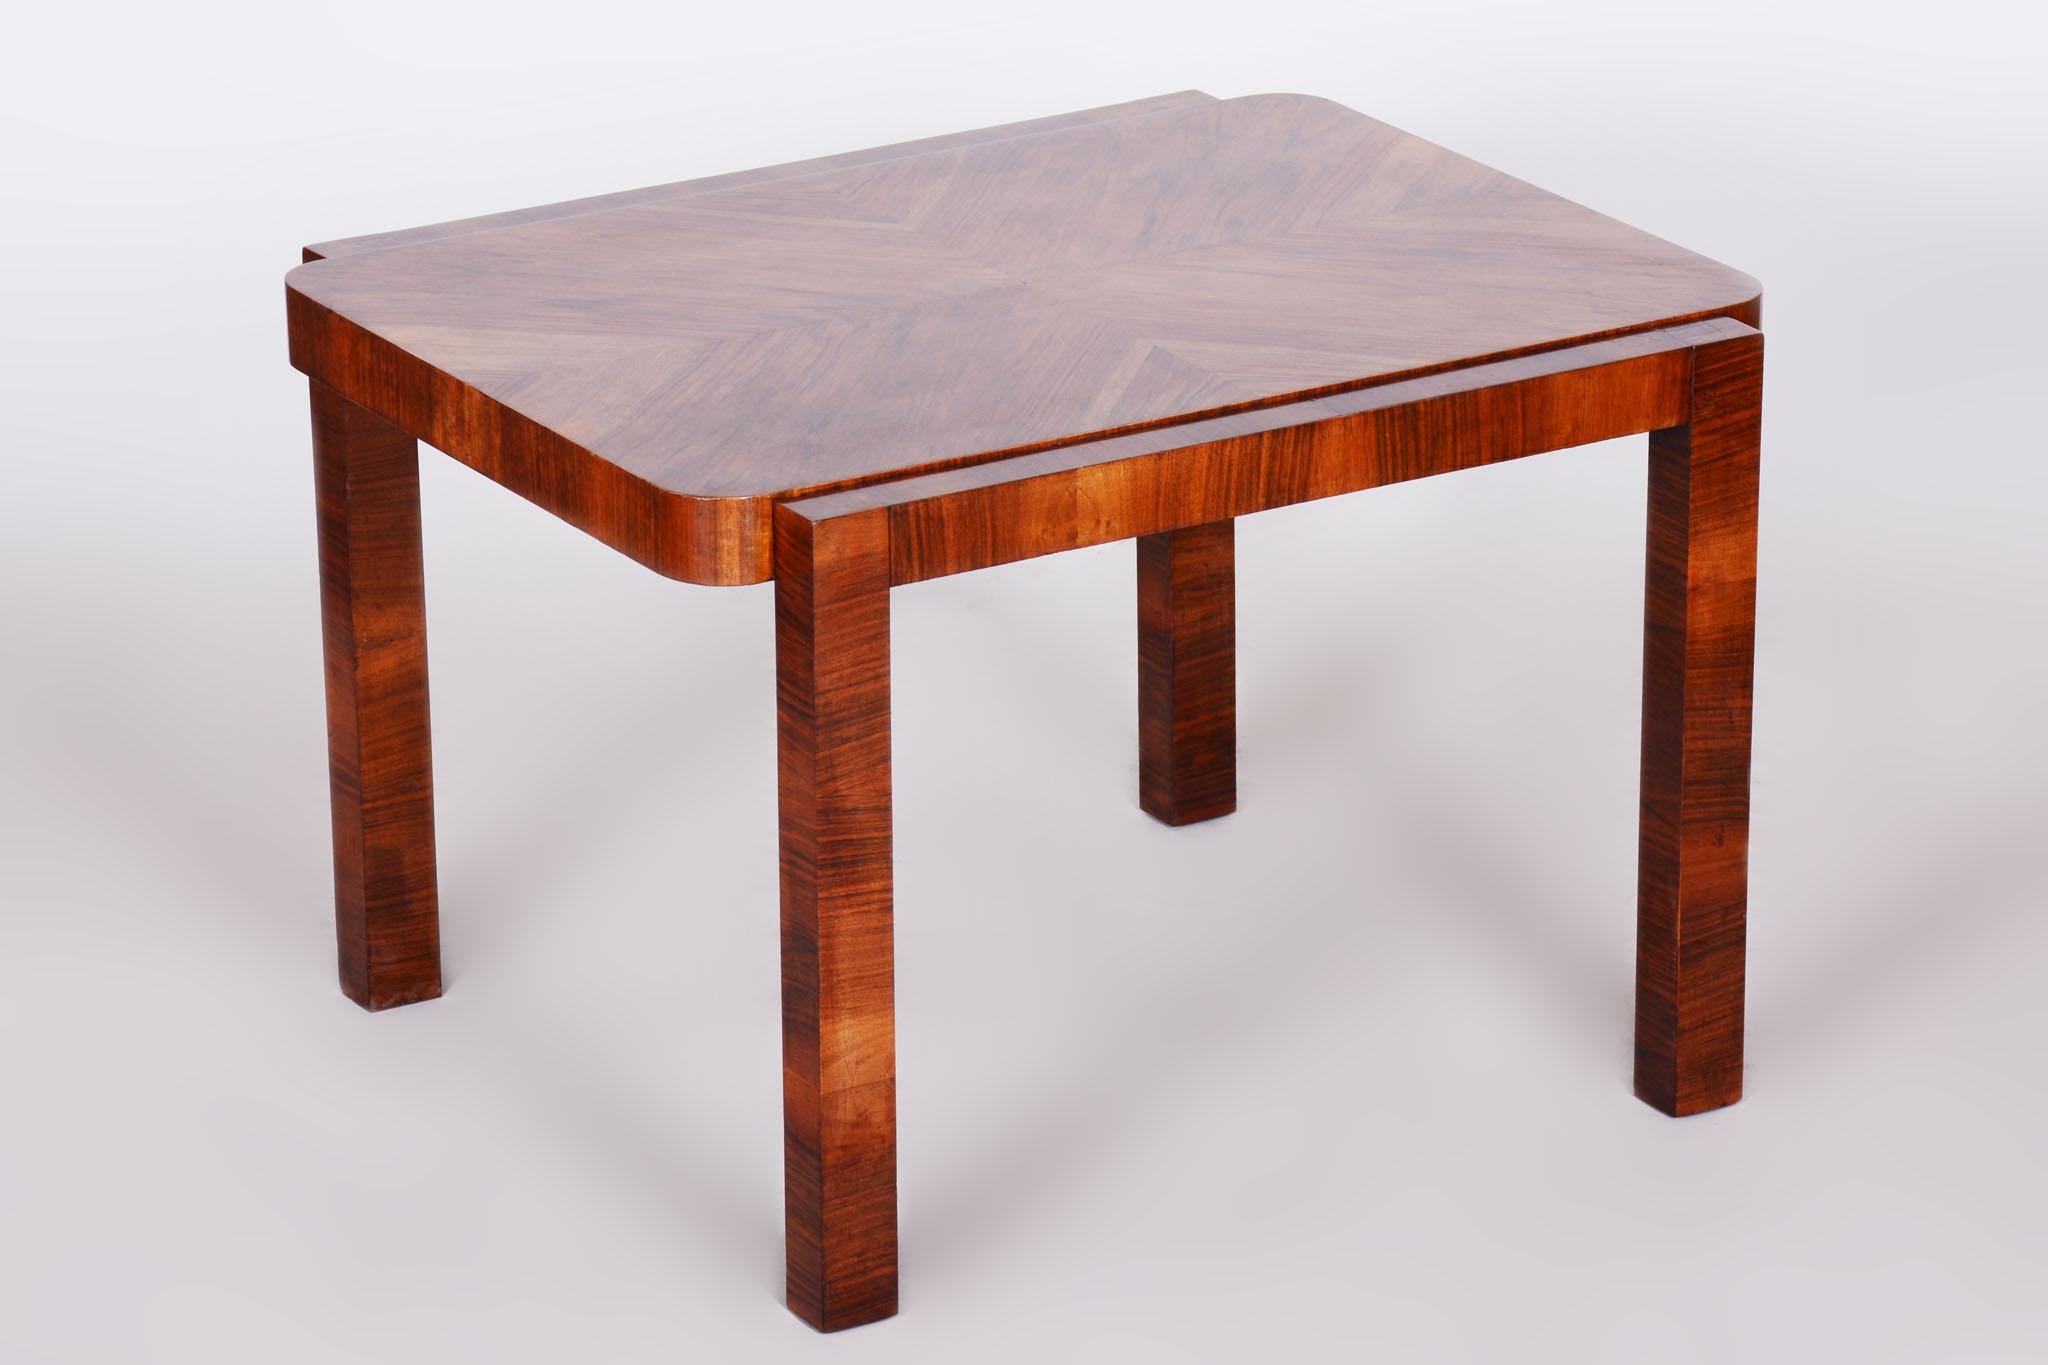 Small Art Deco Table, Made by Thonet, Walnut, Czechia, 1930s, Fully Restored For Sale 1